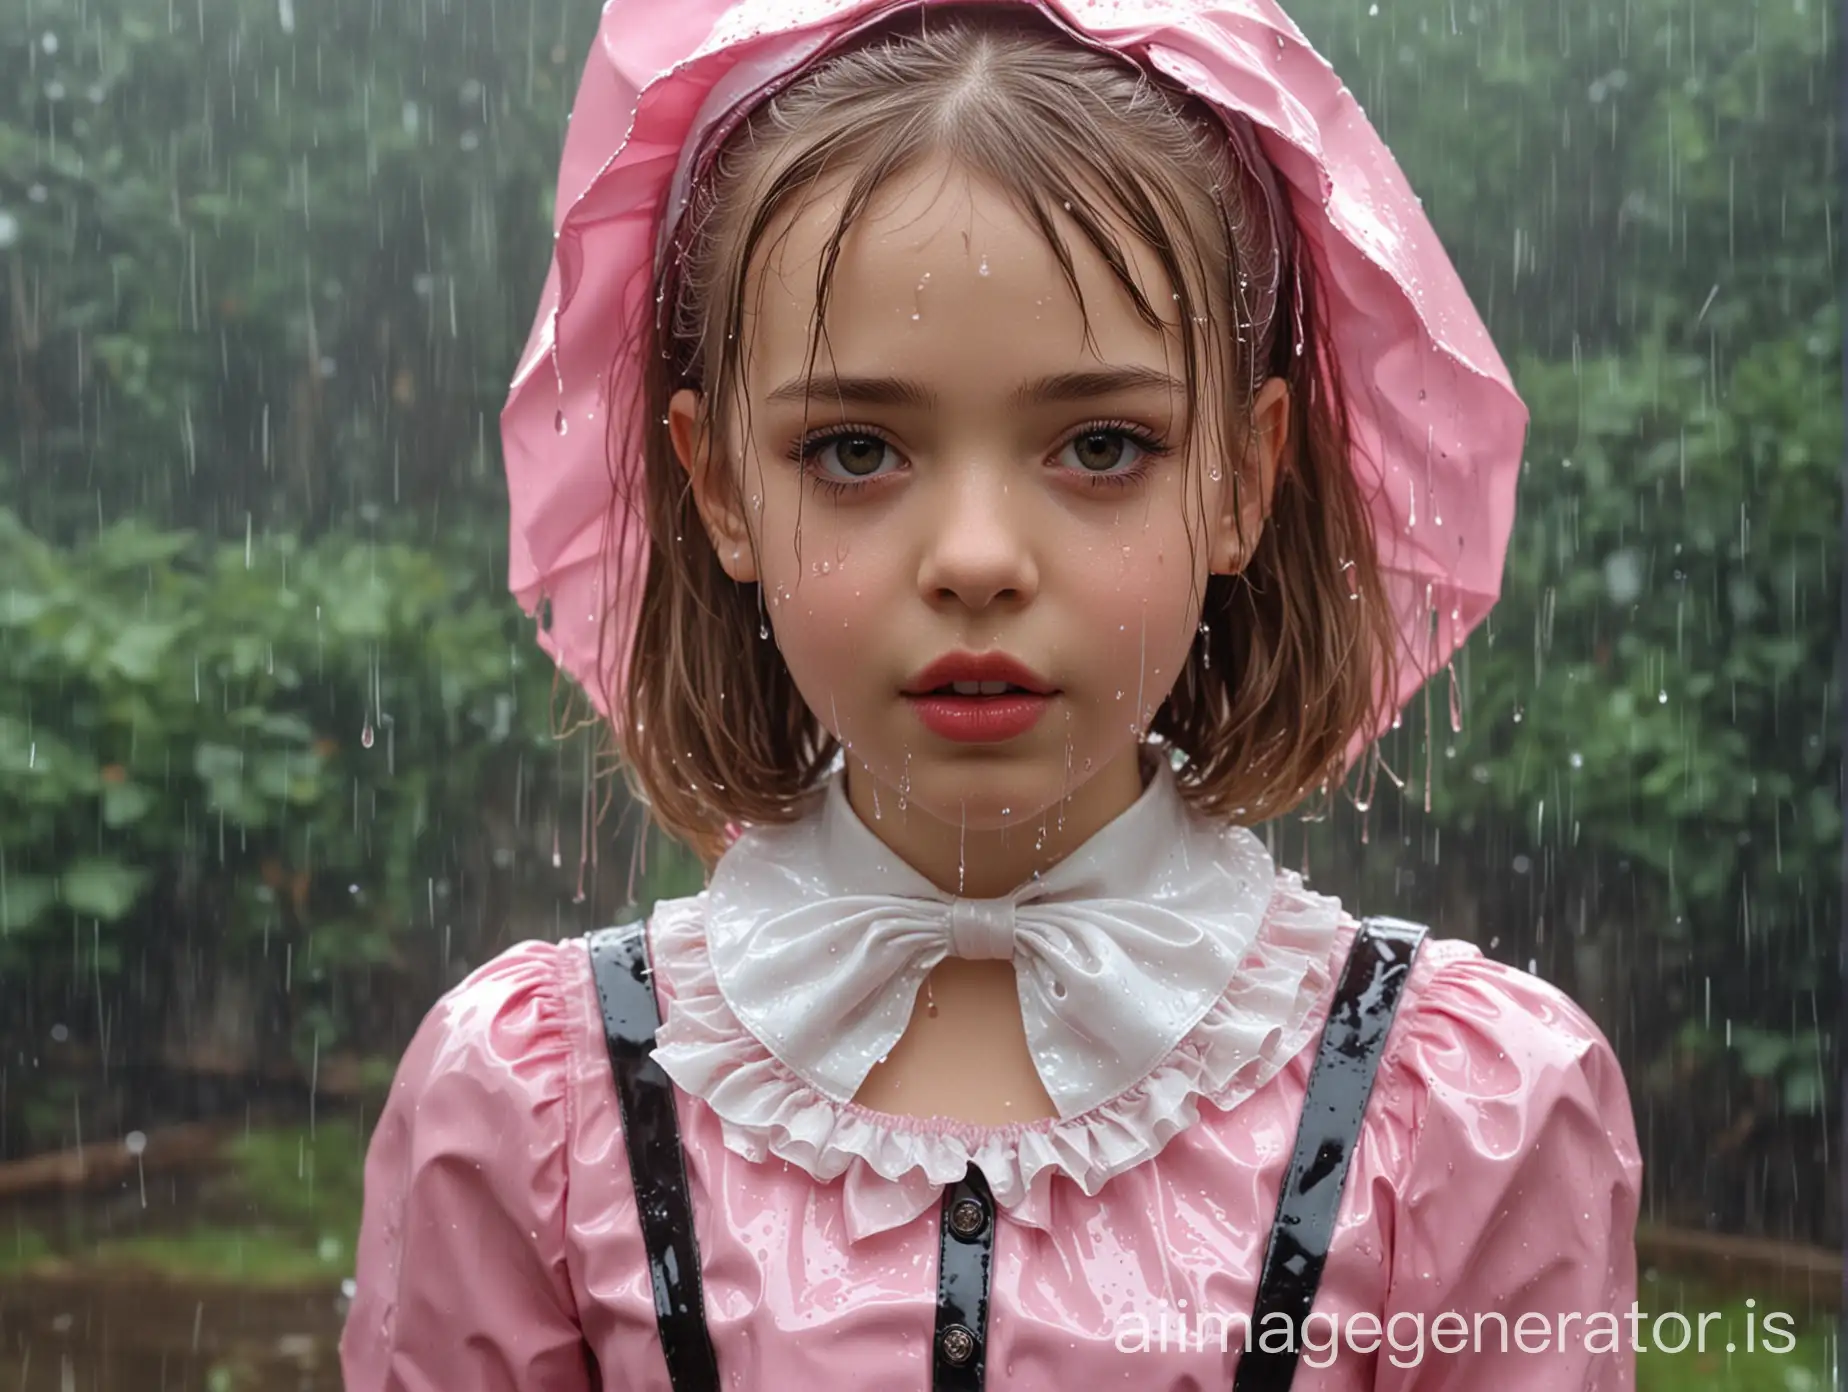 Hyperrealistic-10YearOld-French-Girl-in-Shiny-Pink-and-Yellow-Latex-Sweet-Lolita-Outfit-Standing-in-Summer-Rain